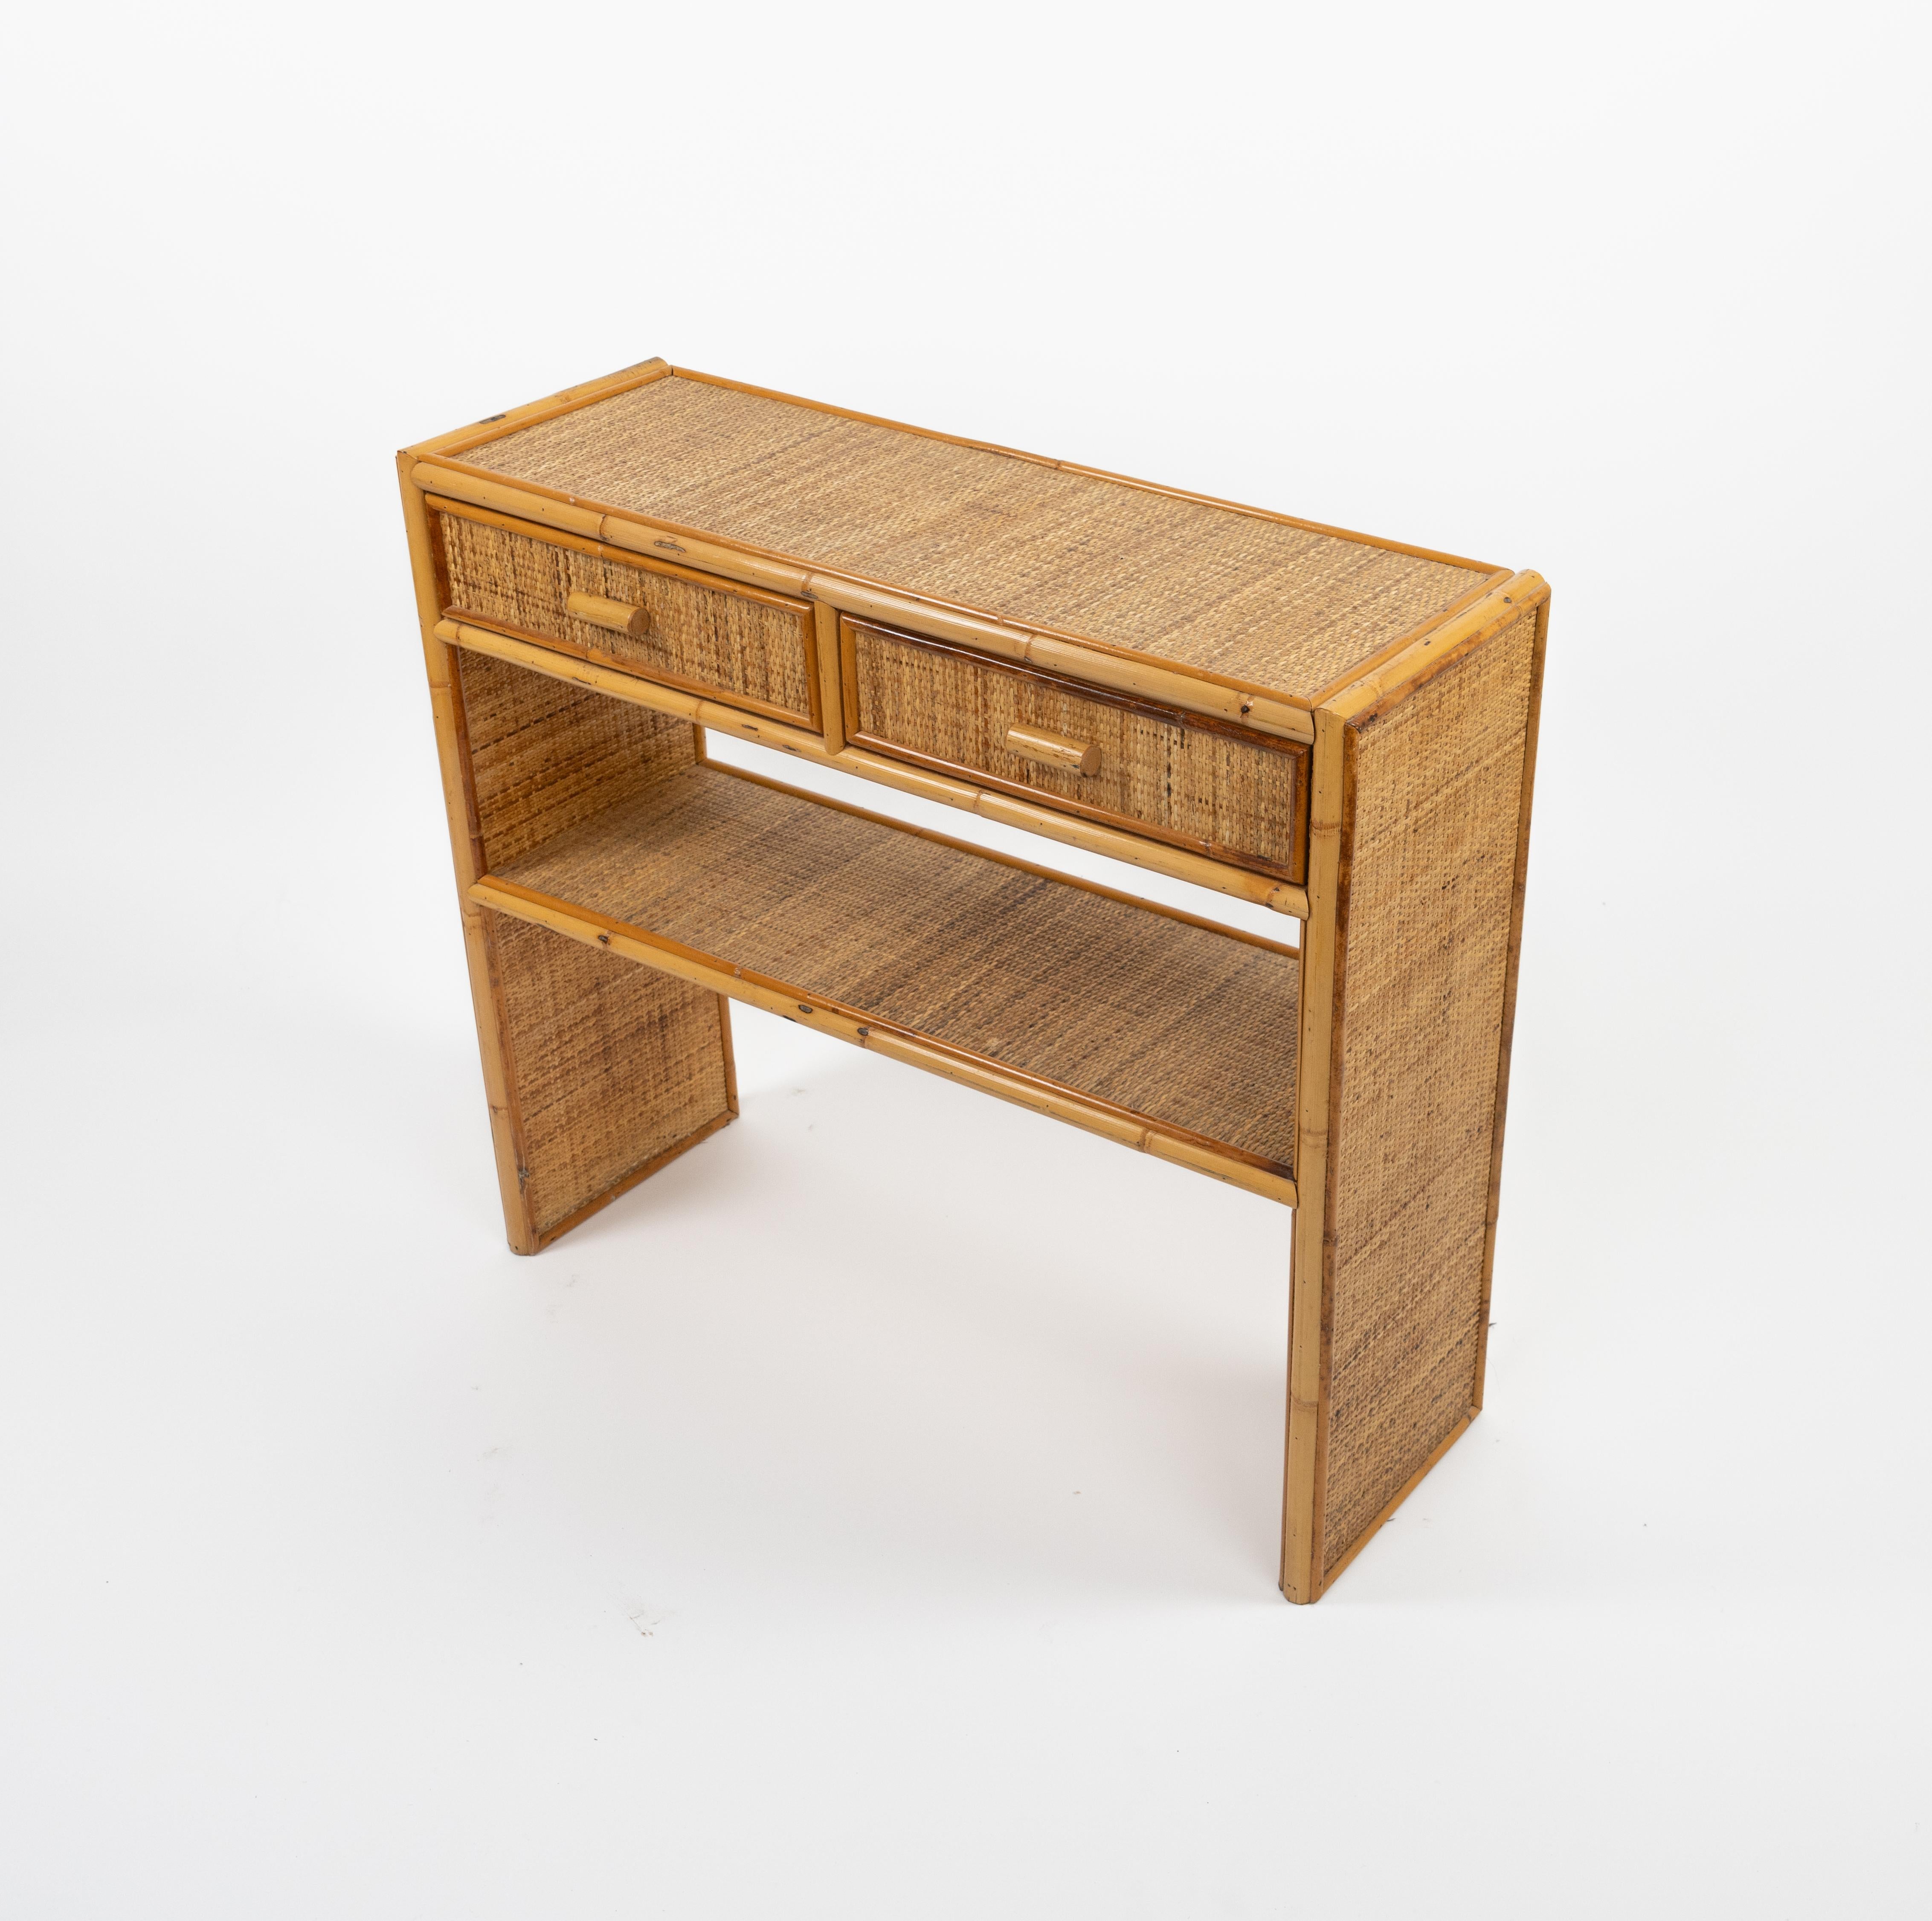 Midcentury Bamboo and Rattan Console Table with Drawers, Italy 1970s For Sale 4